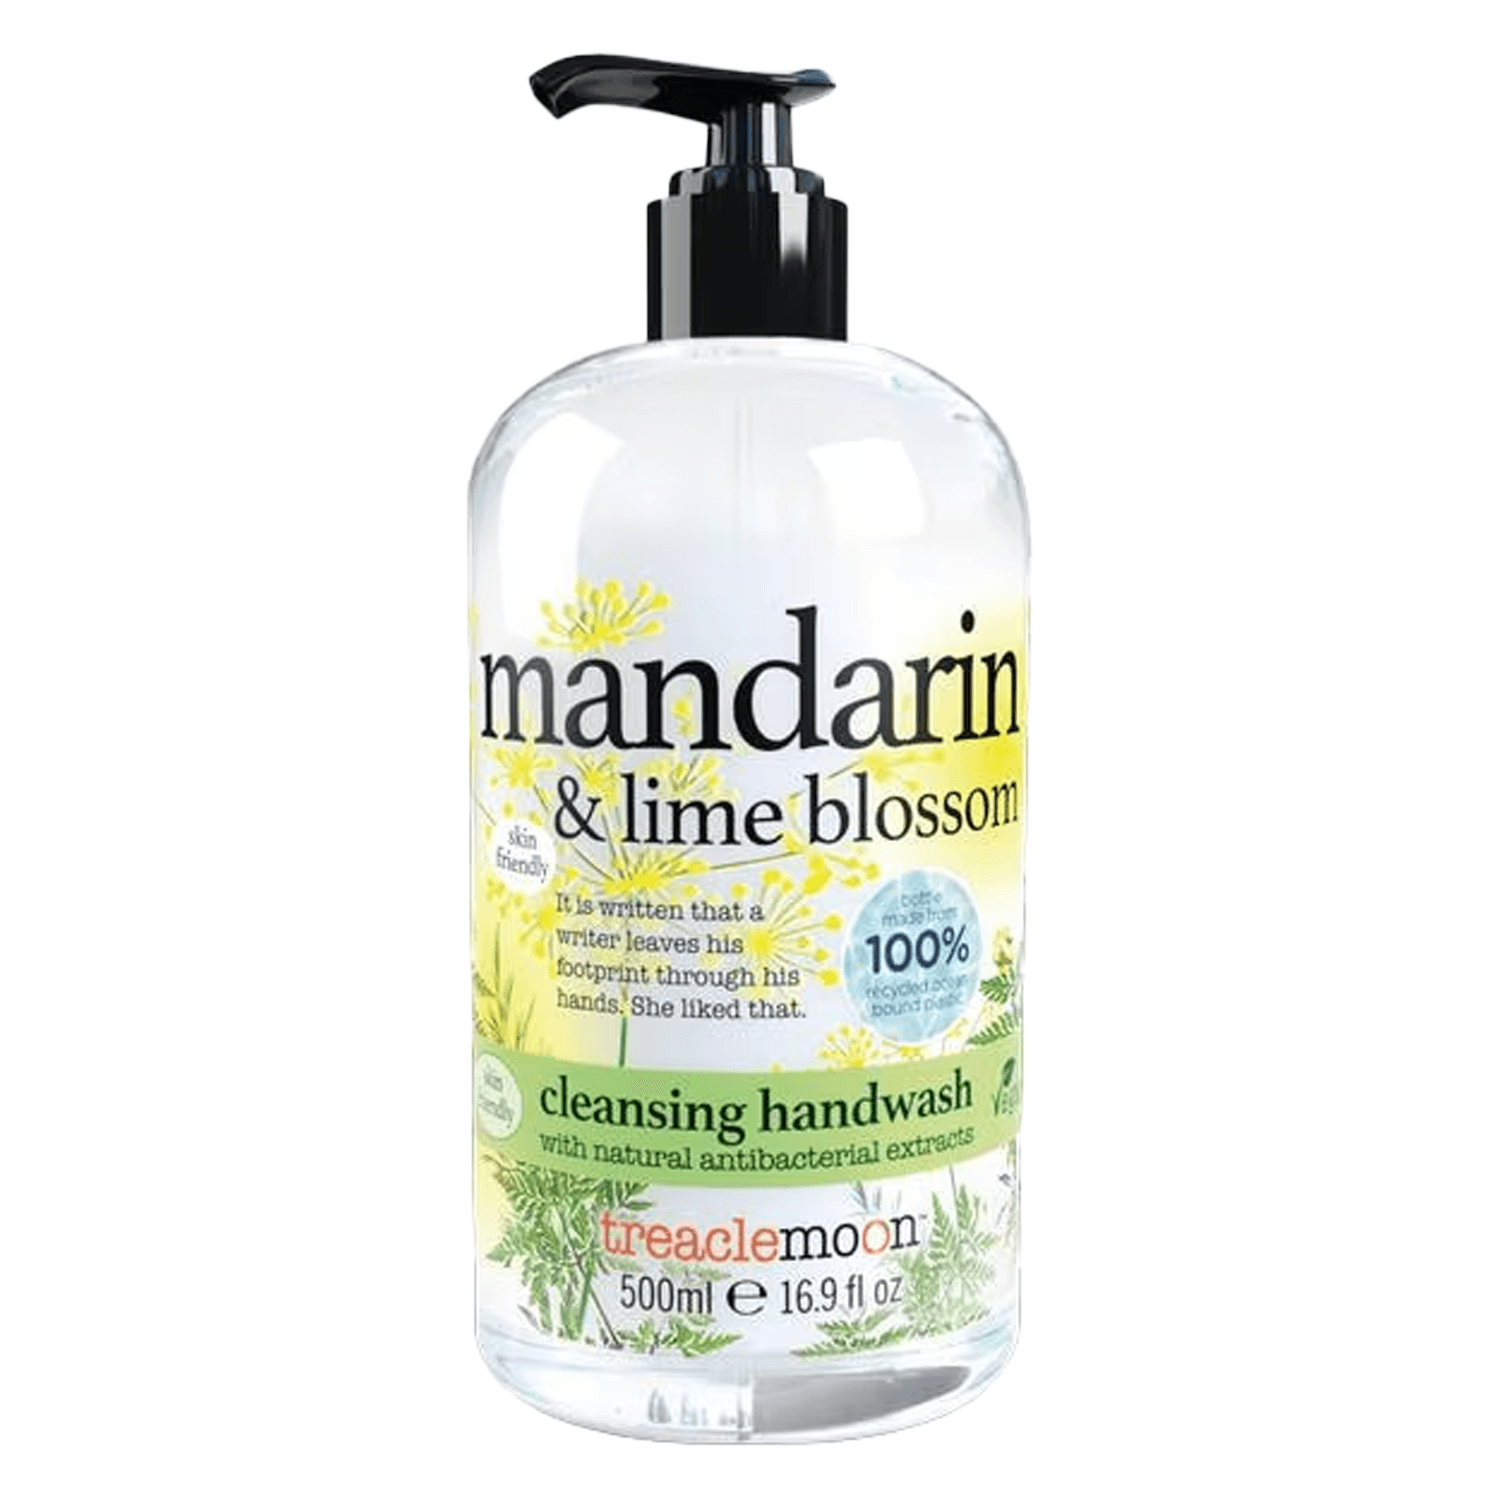 Product image from treaclemoon - mandarin & lime blossom cleansing handwash